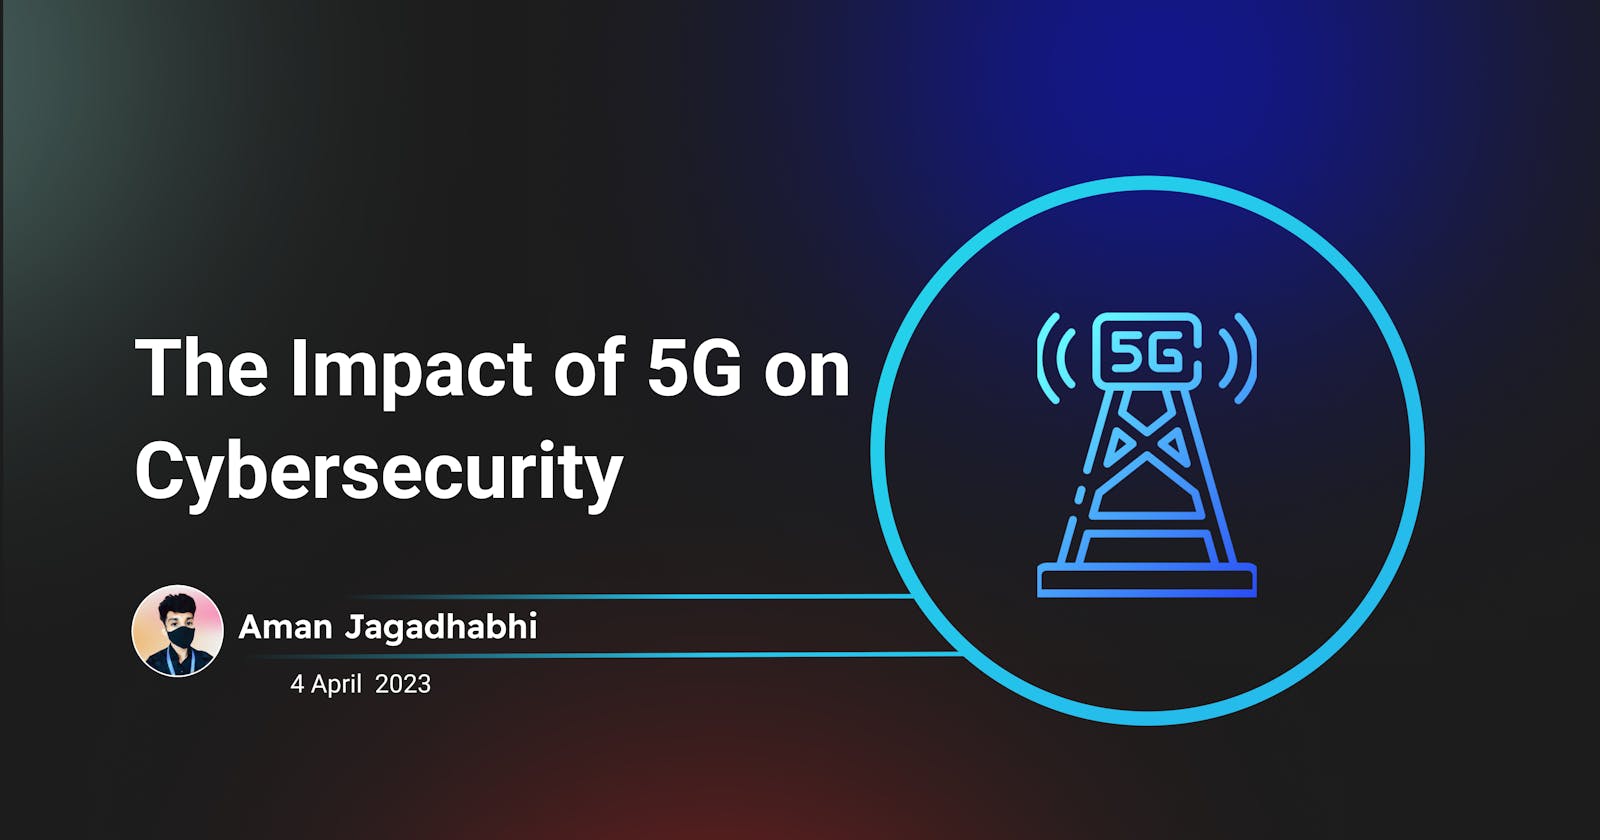 The Impact of 5G on Cybersecurity